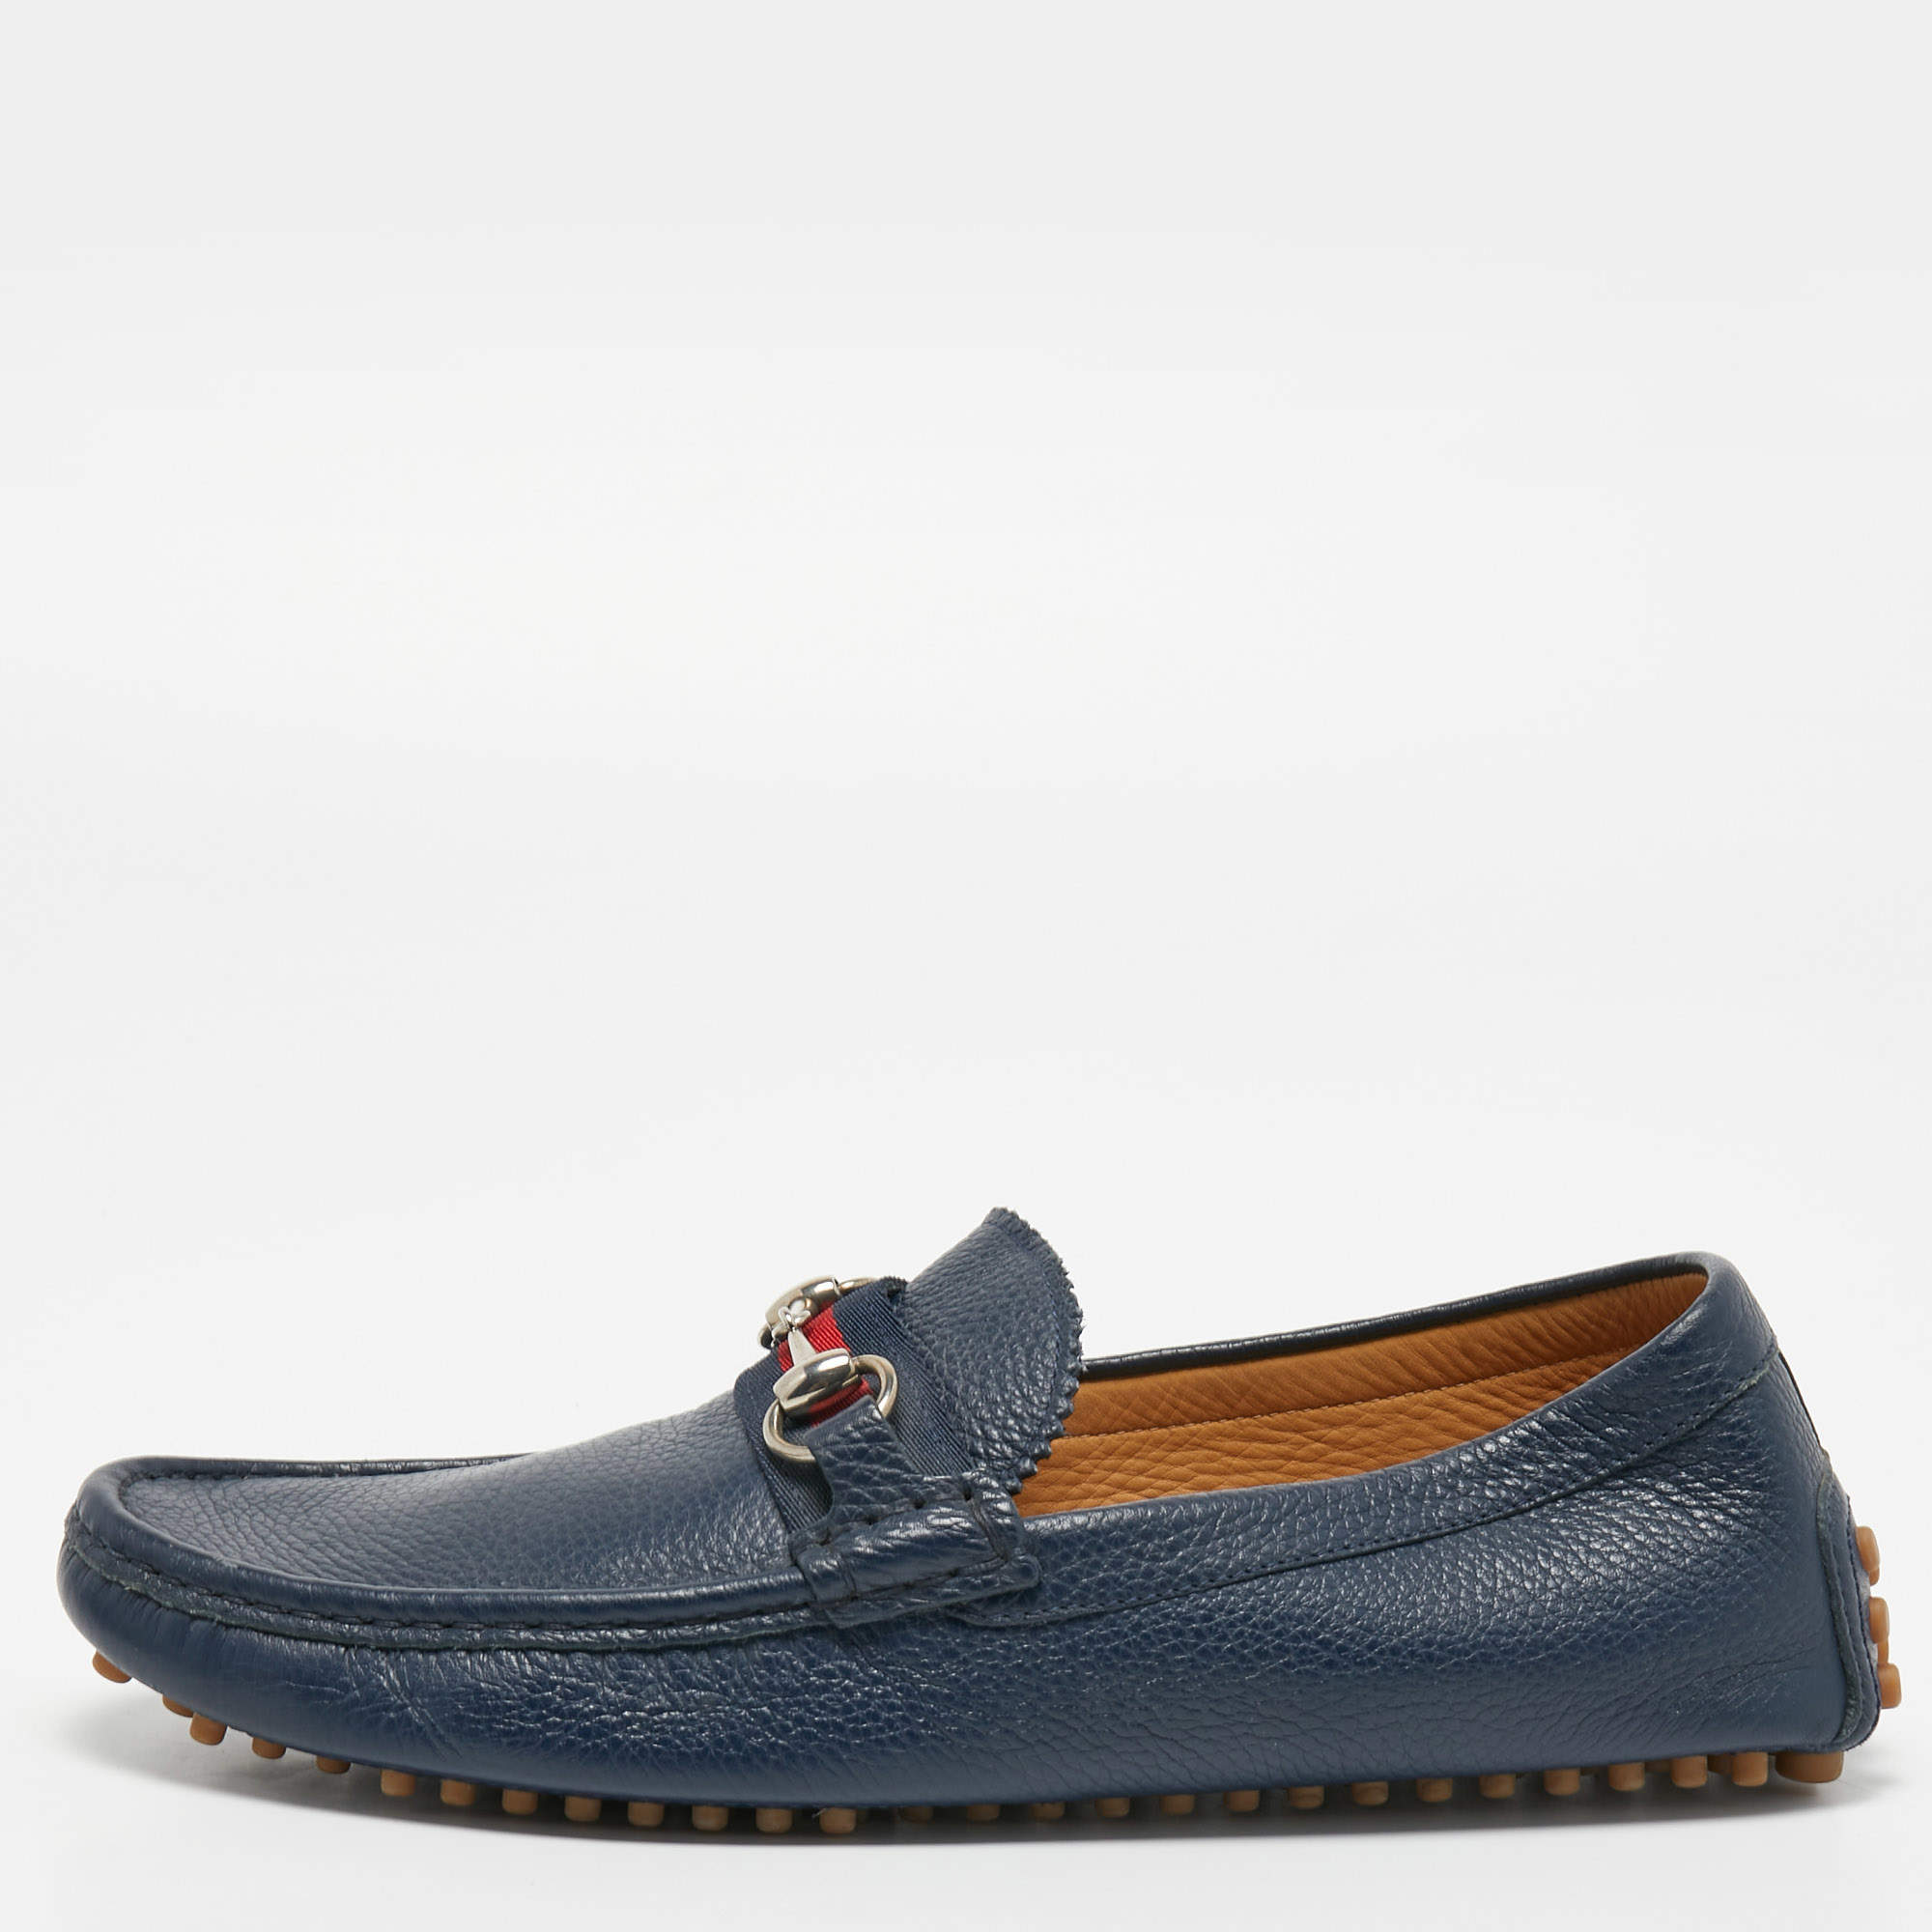 Gucci Navy Blue Leather Horsebit Slip On Loafers Size 42.5 Gucci